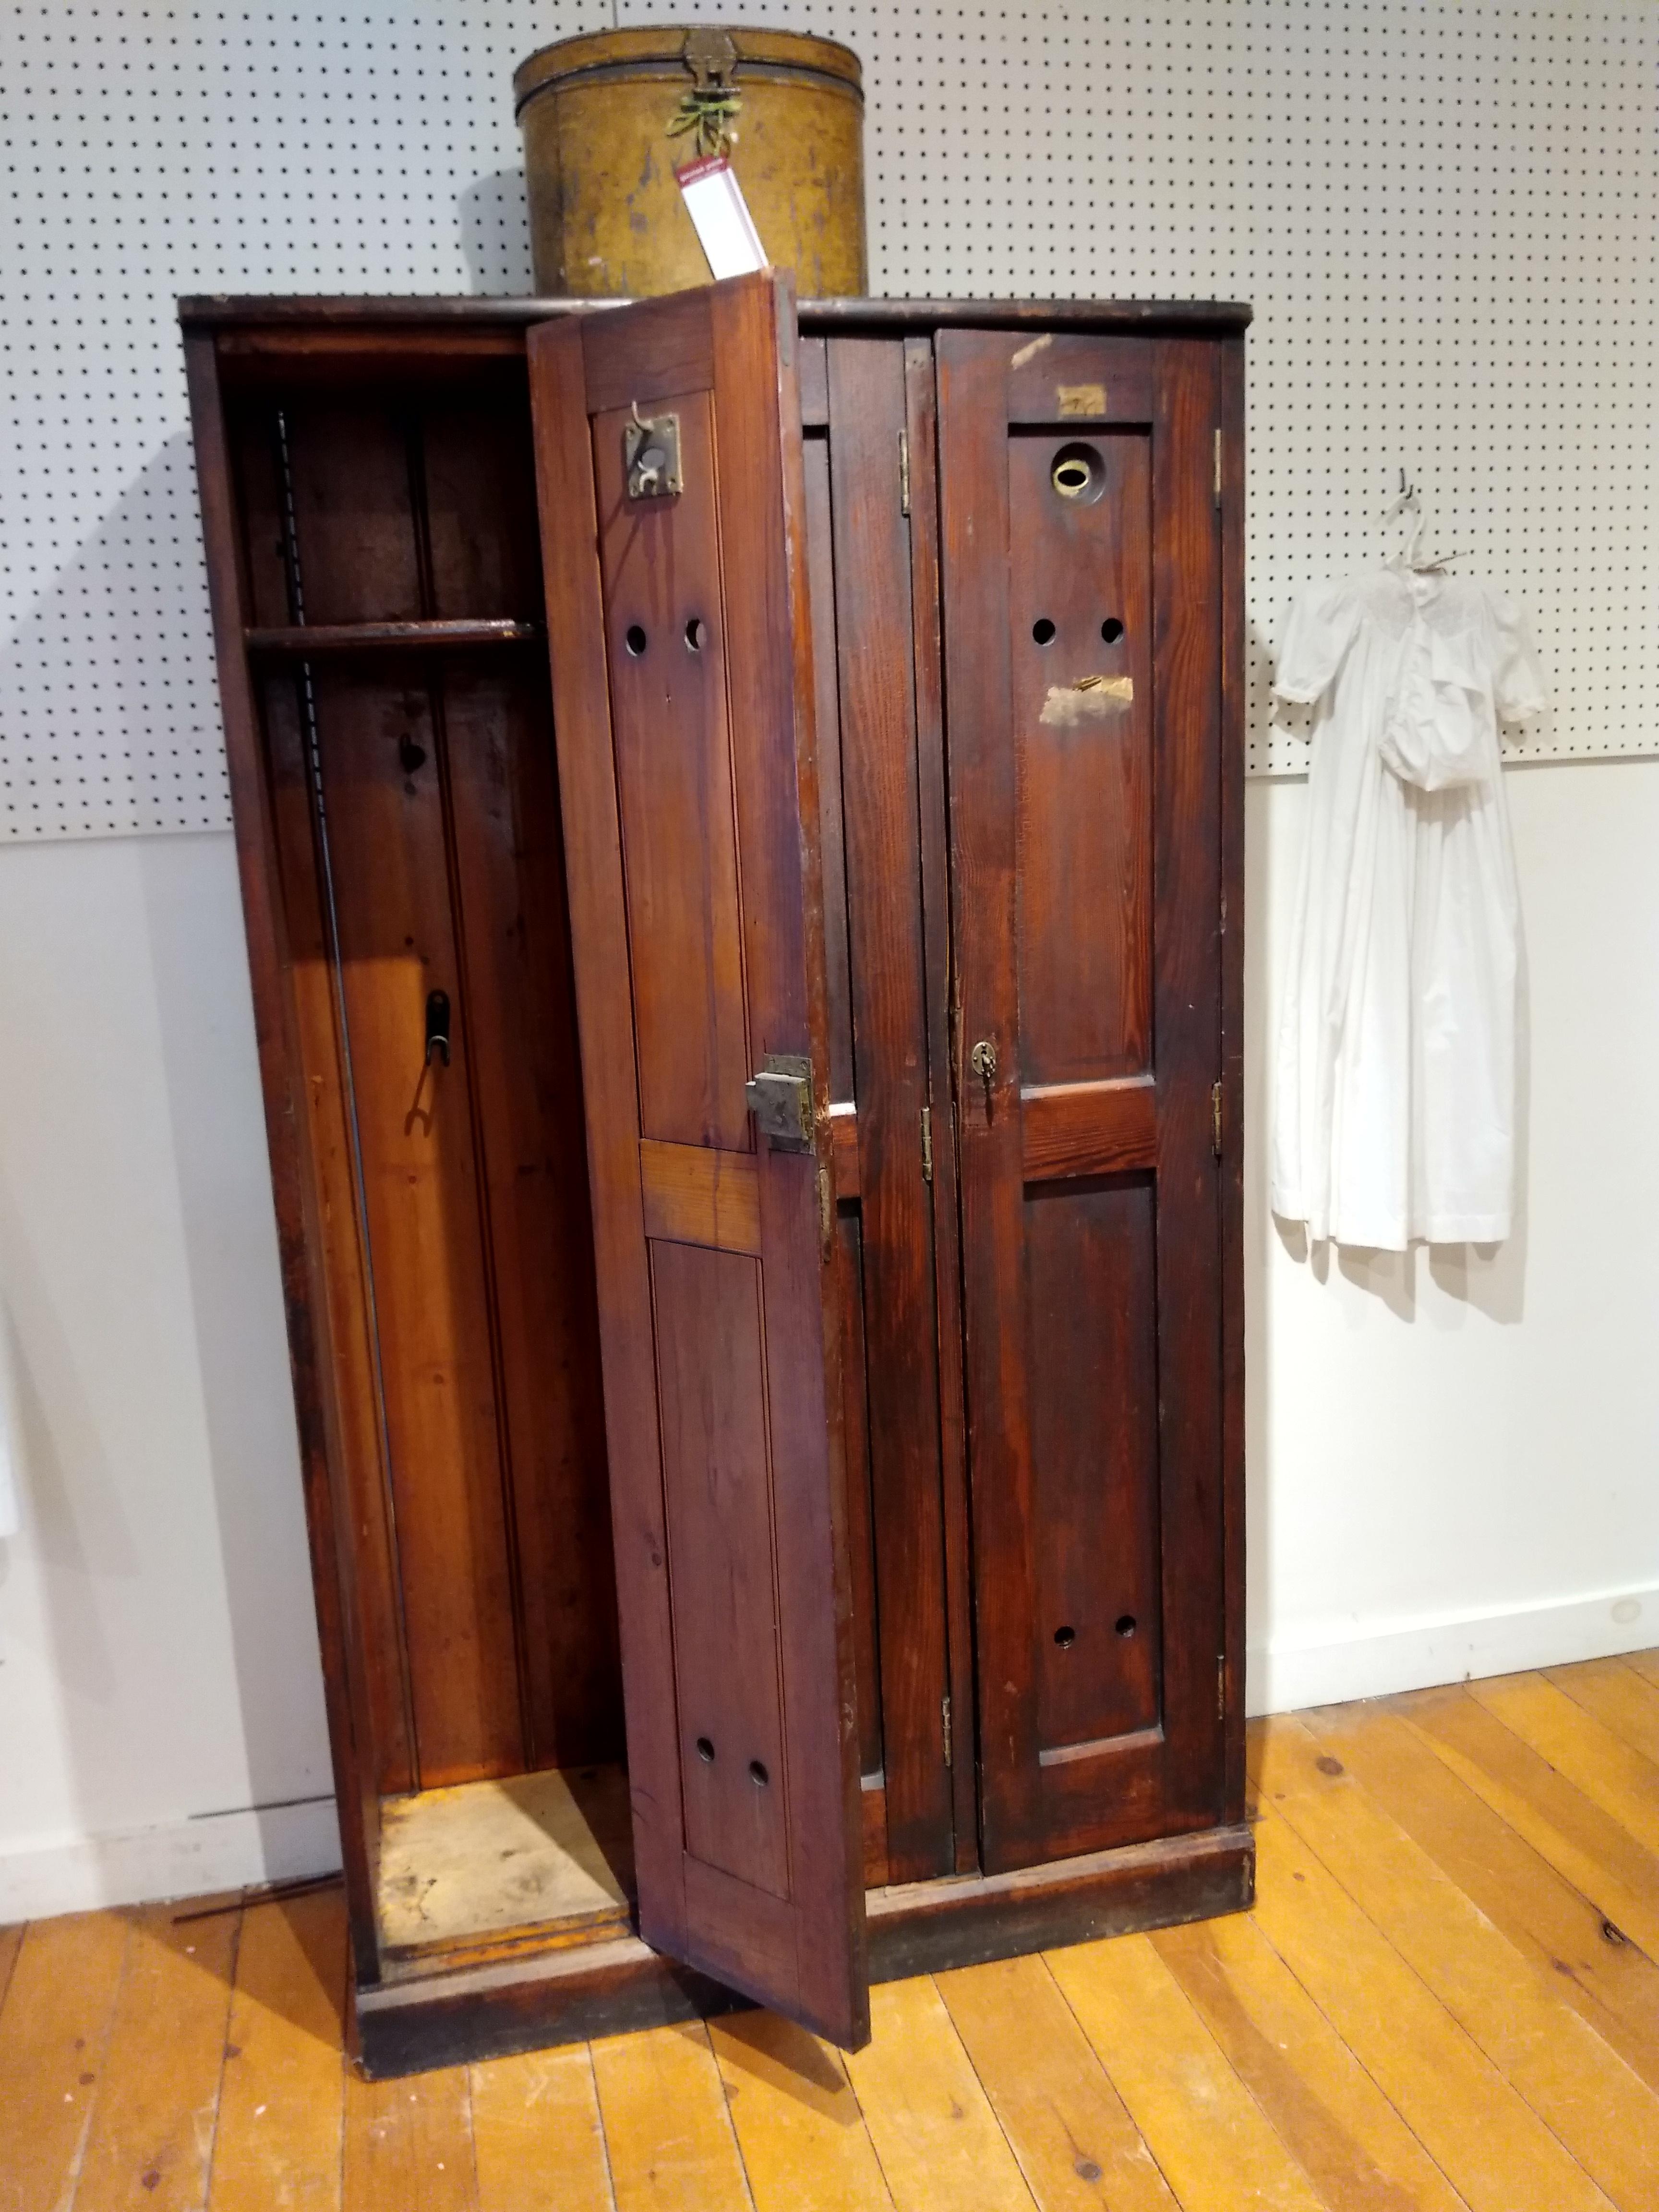 Our wooden golf locker, circa 1870, came from a country club in the Northern UK. It still has some numbers and labels of member names on the doors. Inside there are hooks and one shelf in each locker -- along with small metal troughs and umbrella